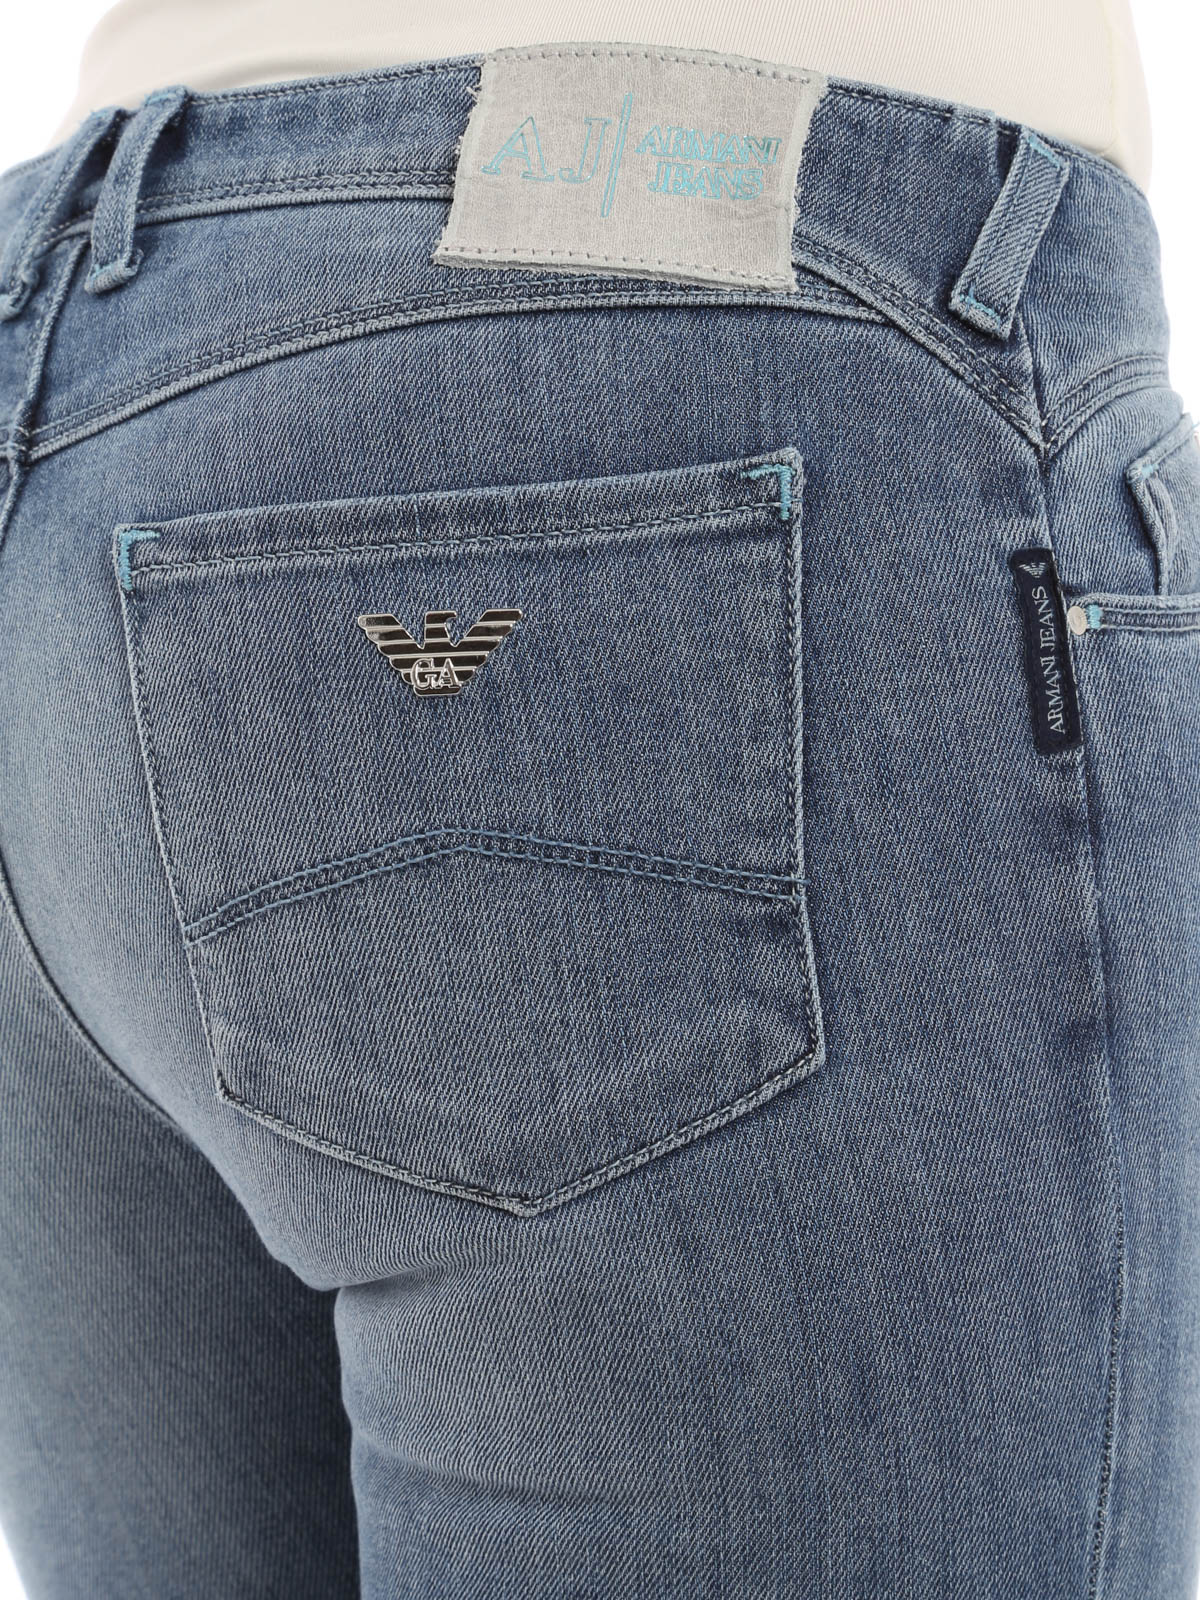 armani orchid jeans